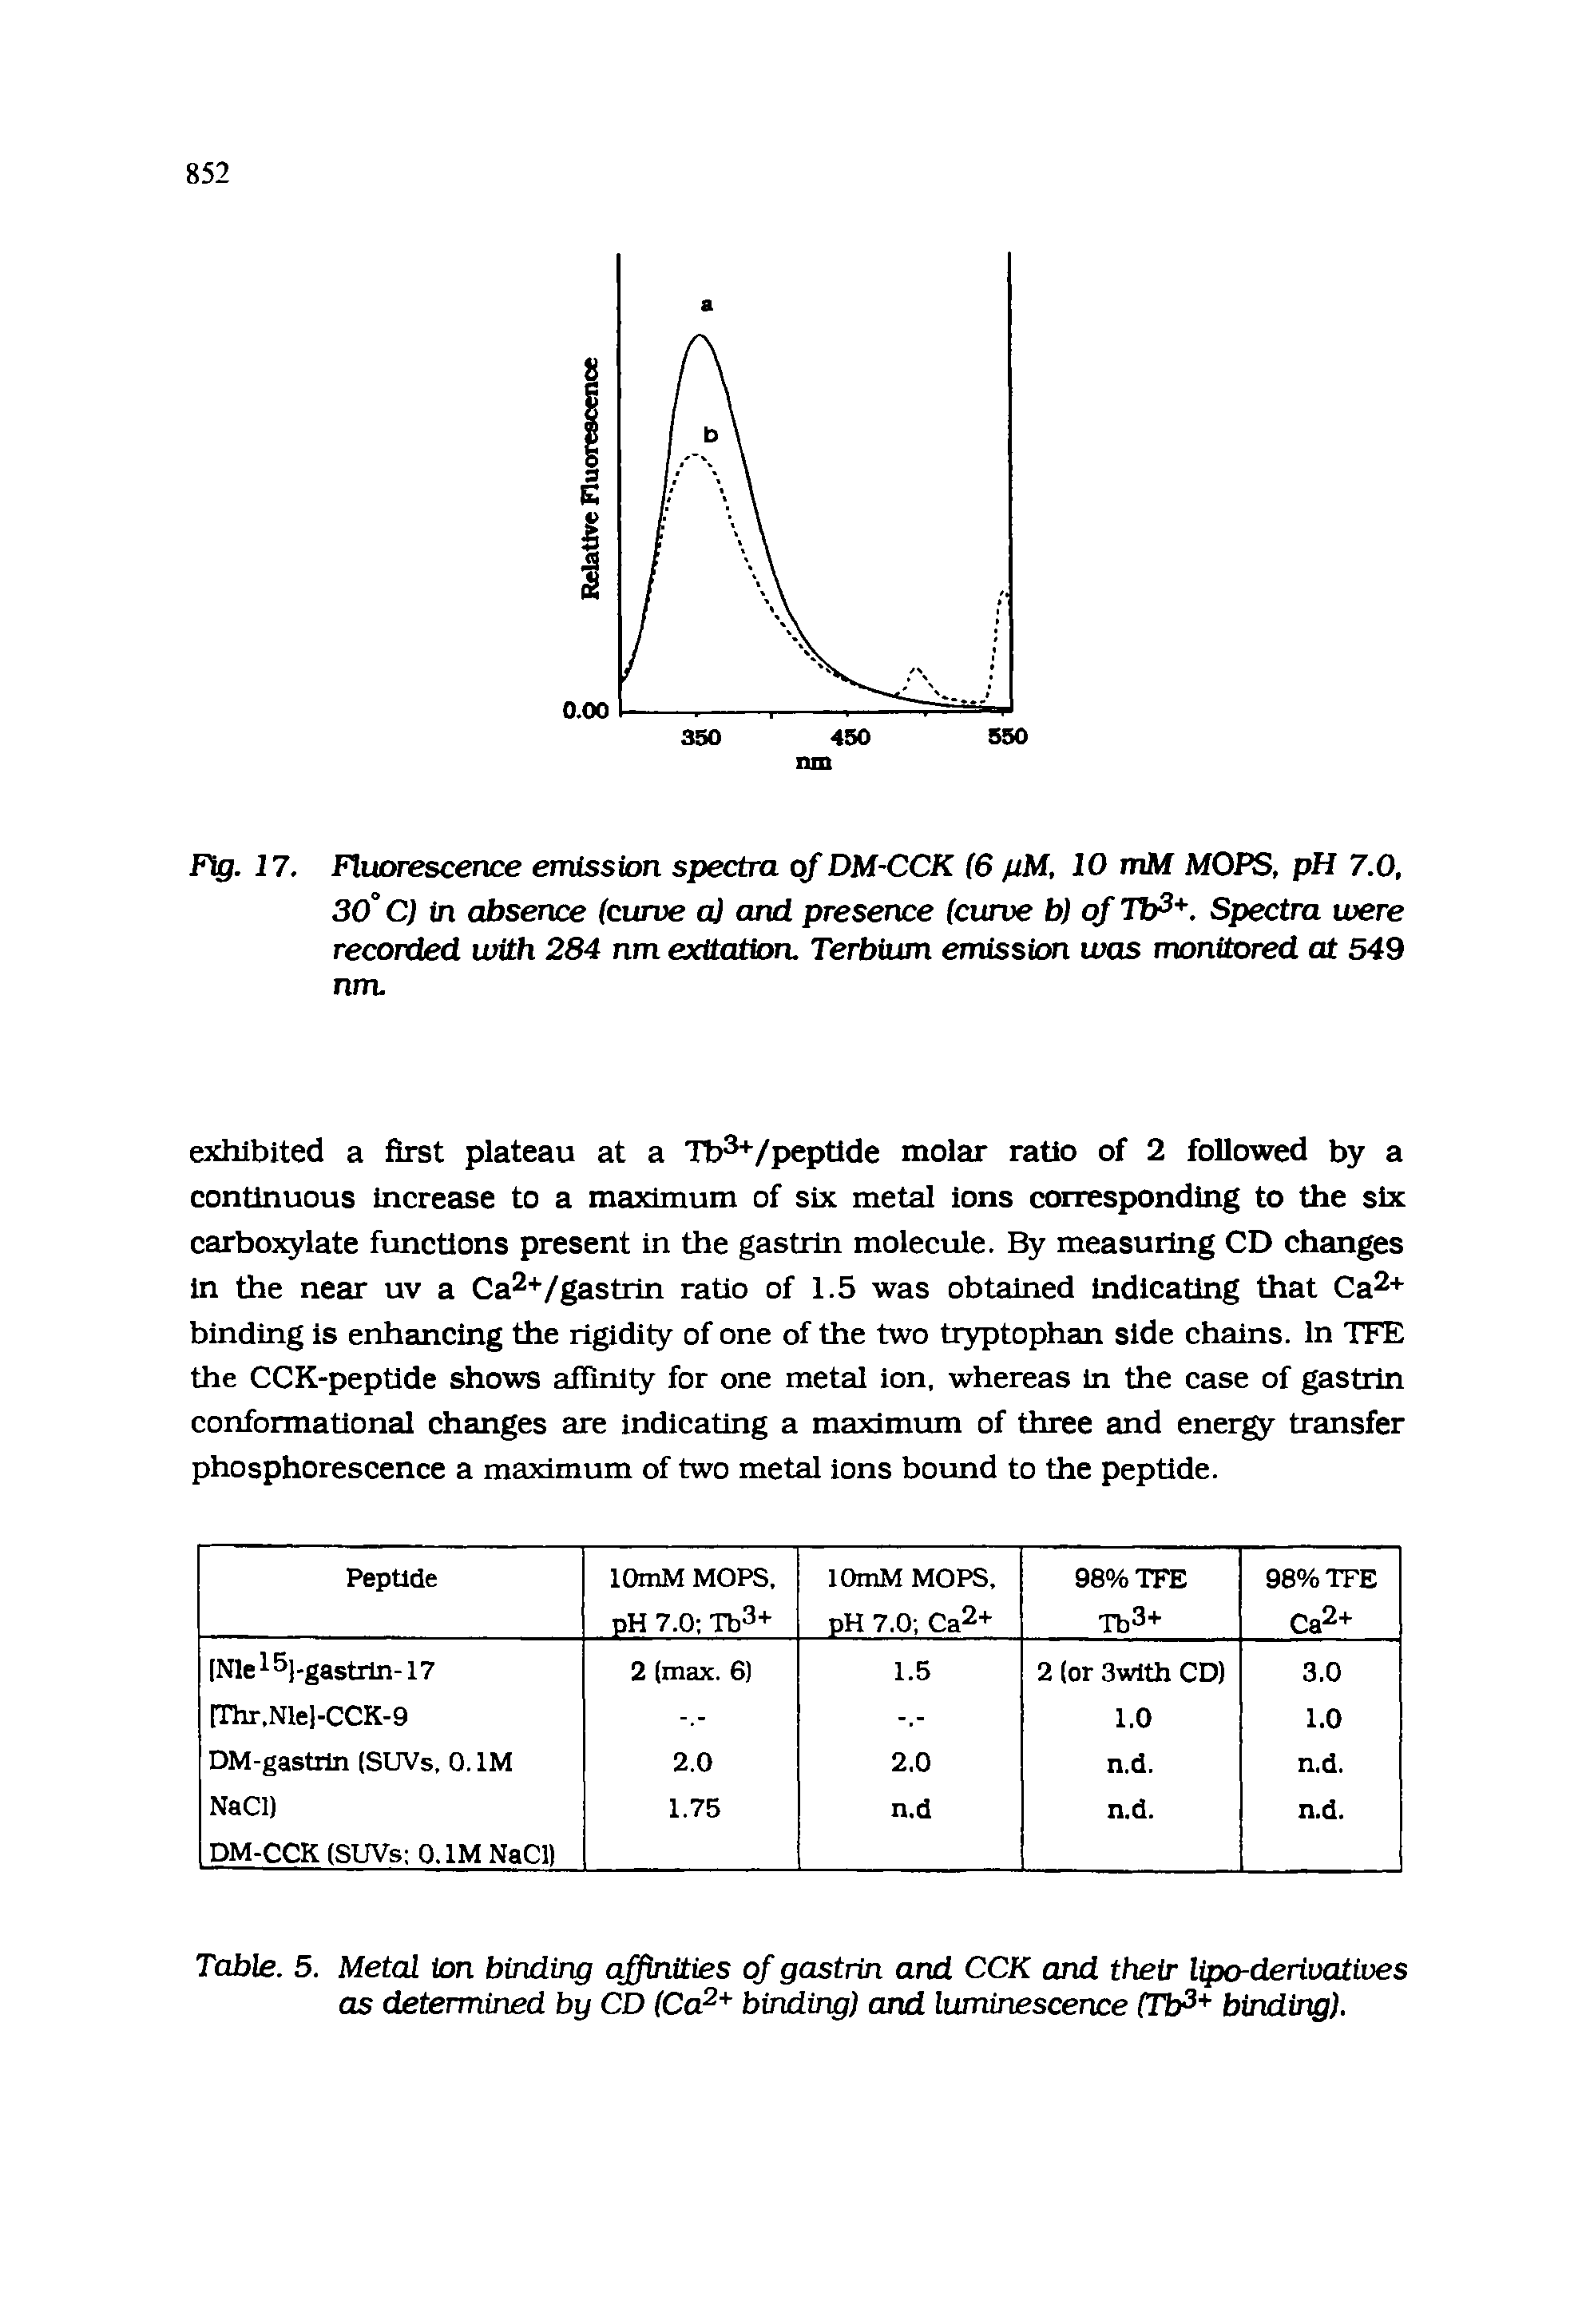 Table. 5. Metal ion binding affinities of gastrin and CCK and their lipo-derivatives as determined by CD (Ca2+ binding) and luminescence (Tb3 binding).